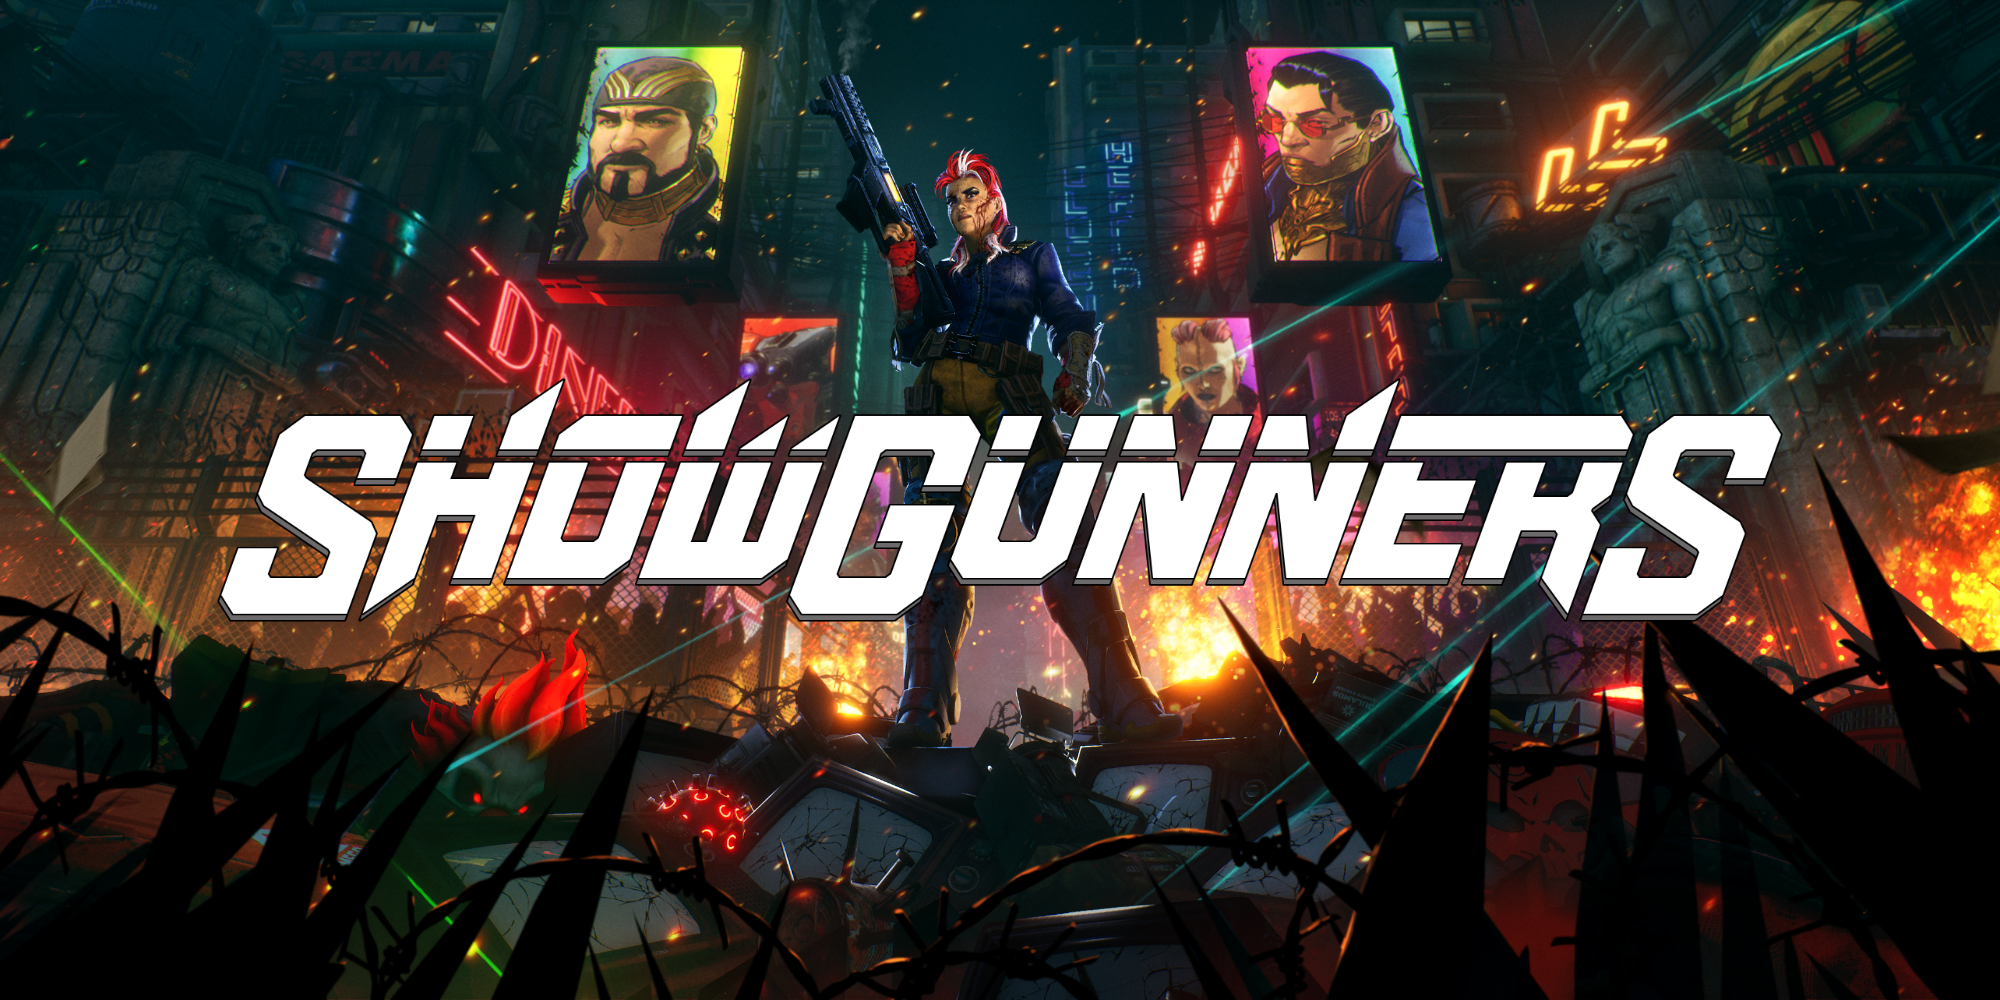 Showgunners Review scarlett key art and game title